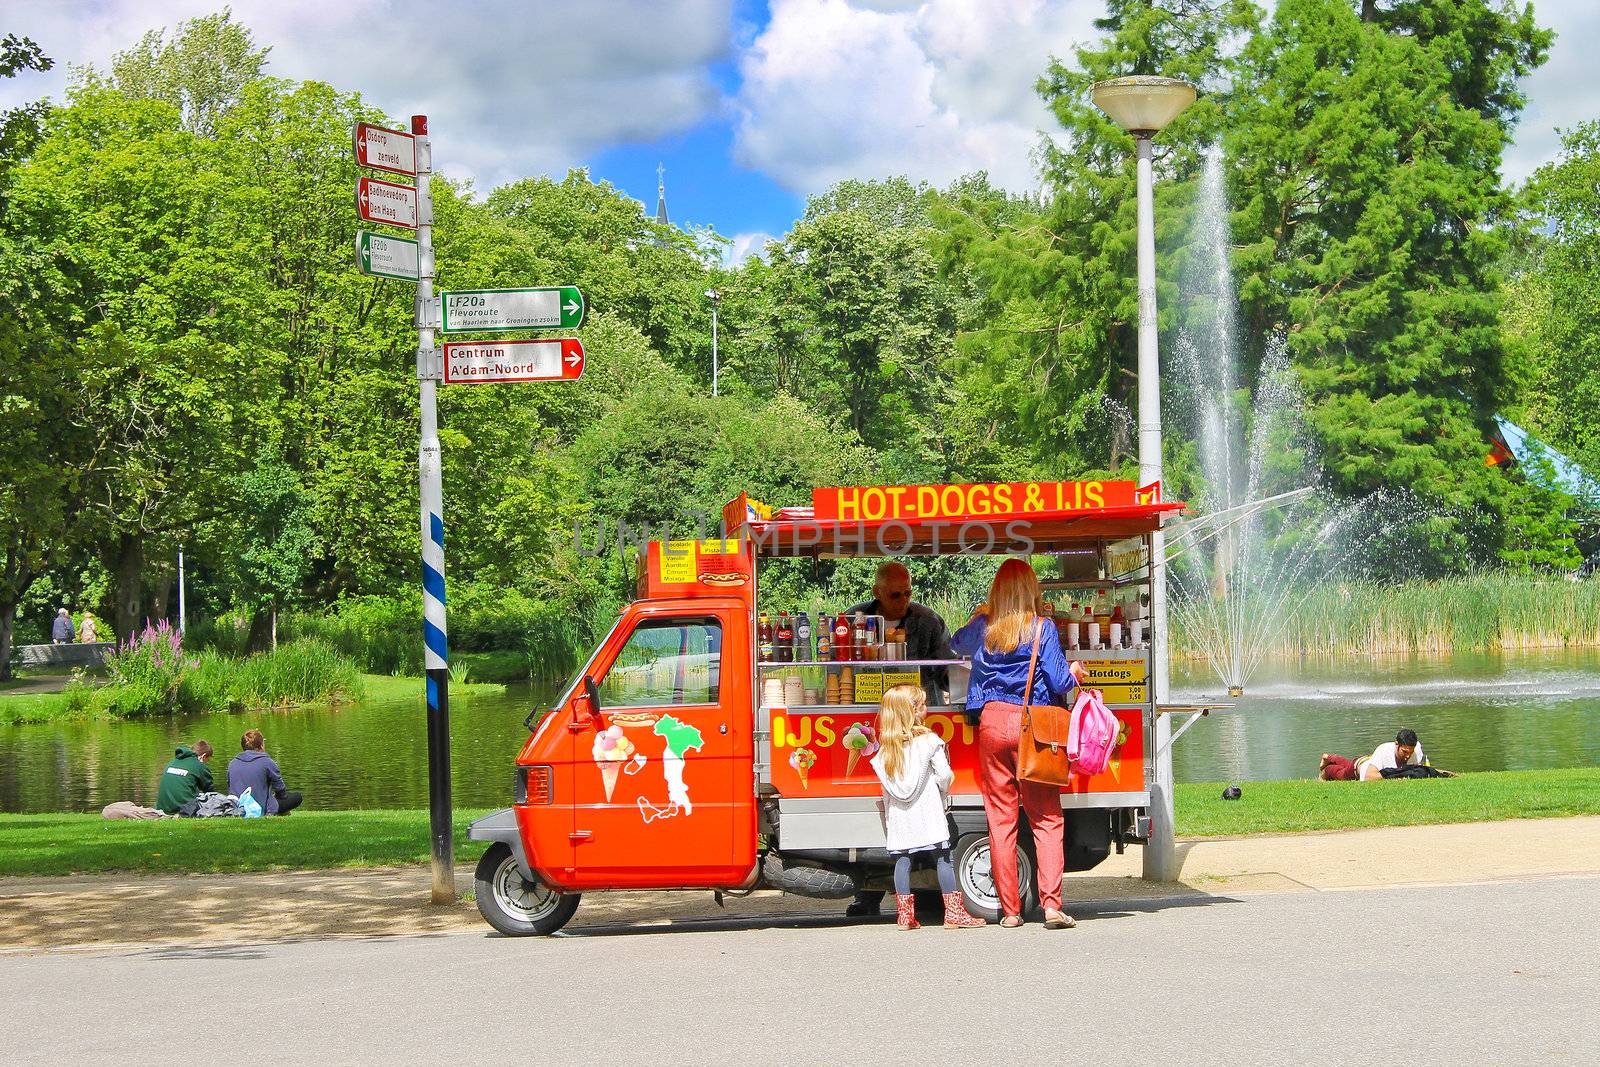 Snack cart in city park in Amsterdam. Netherlands